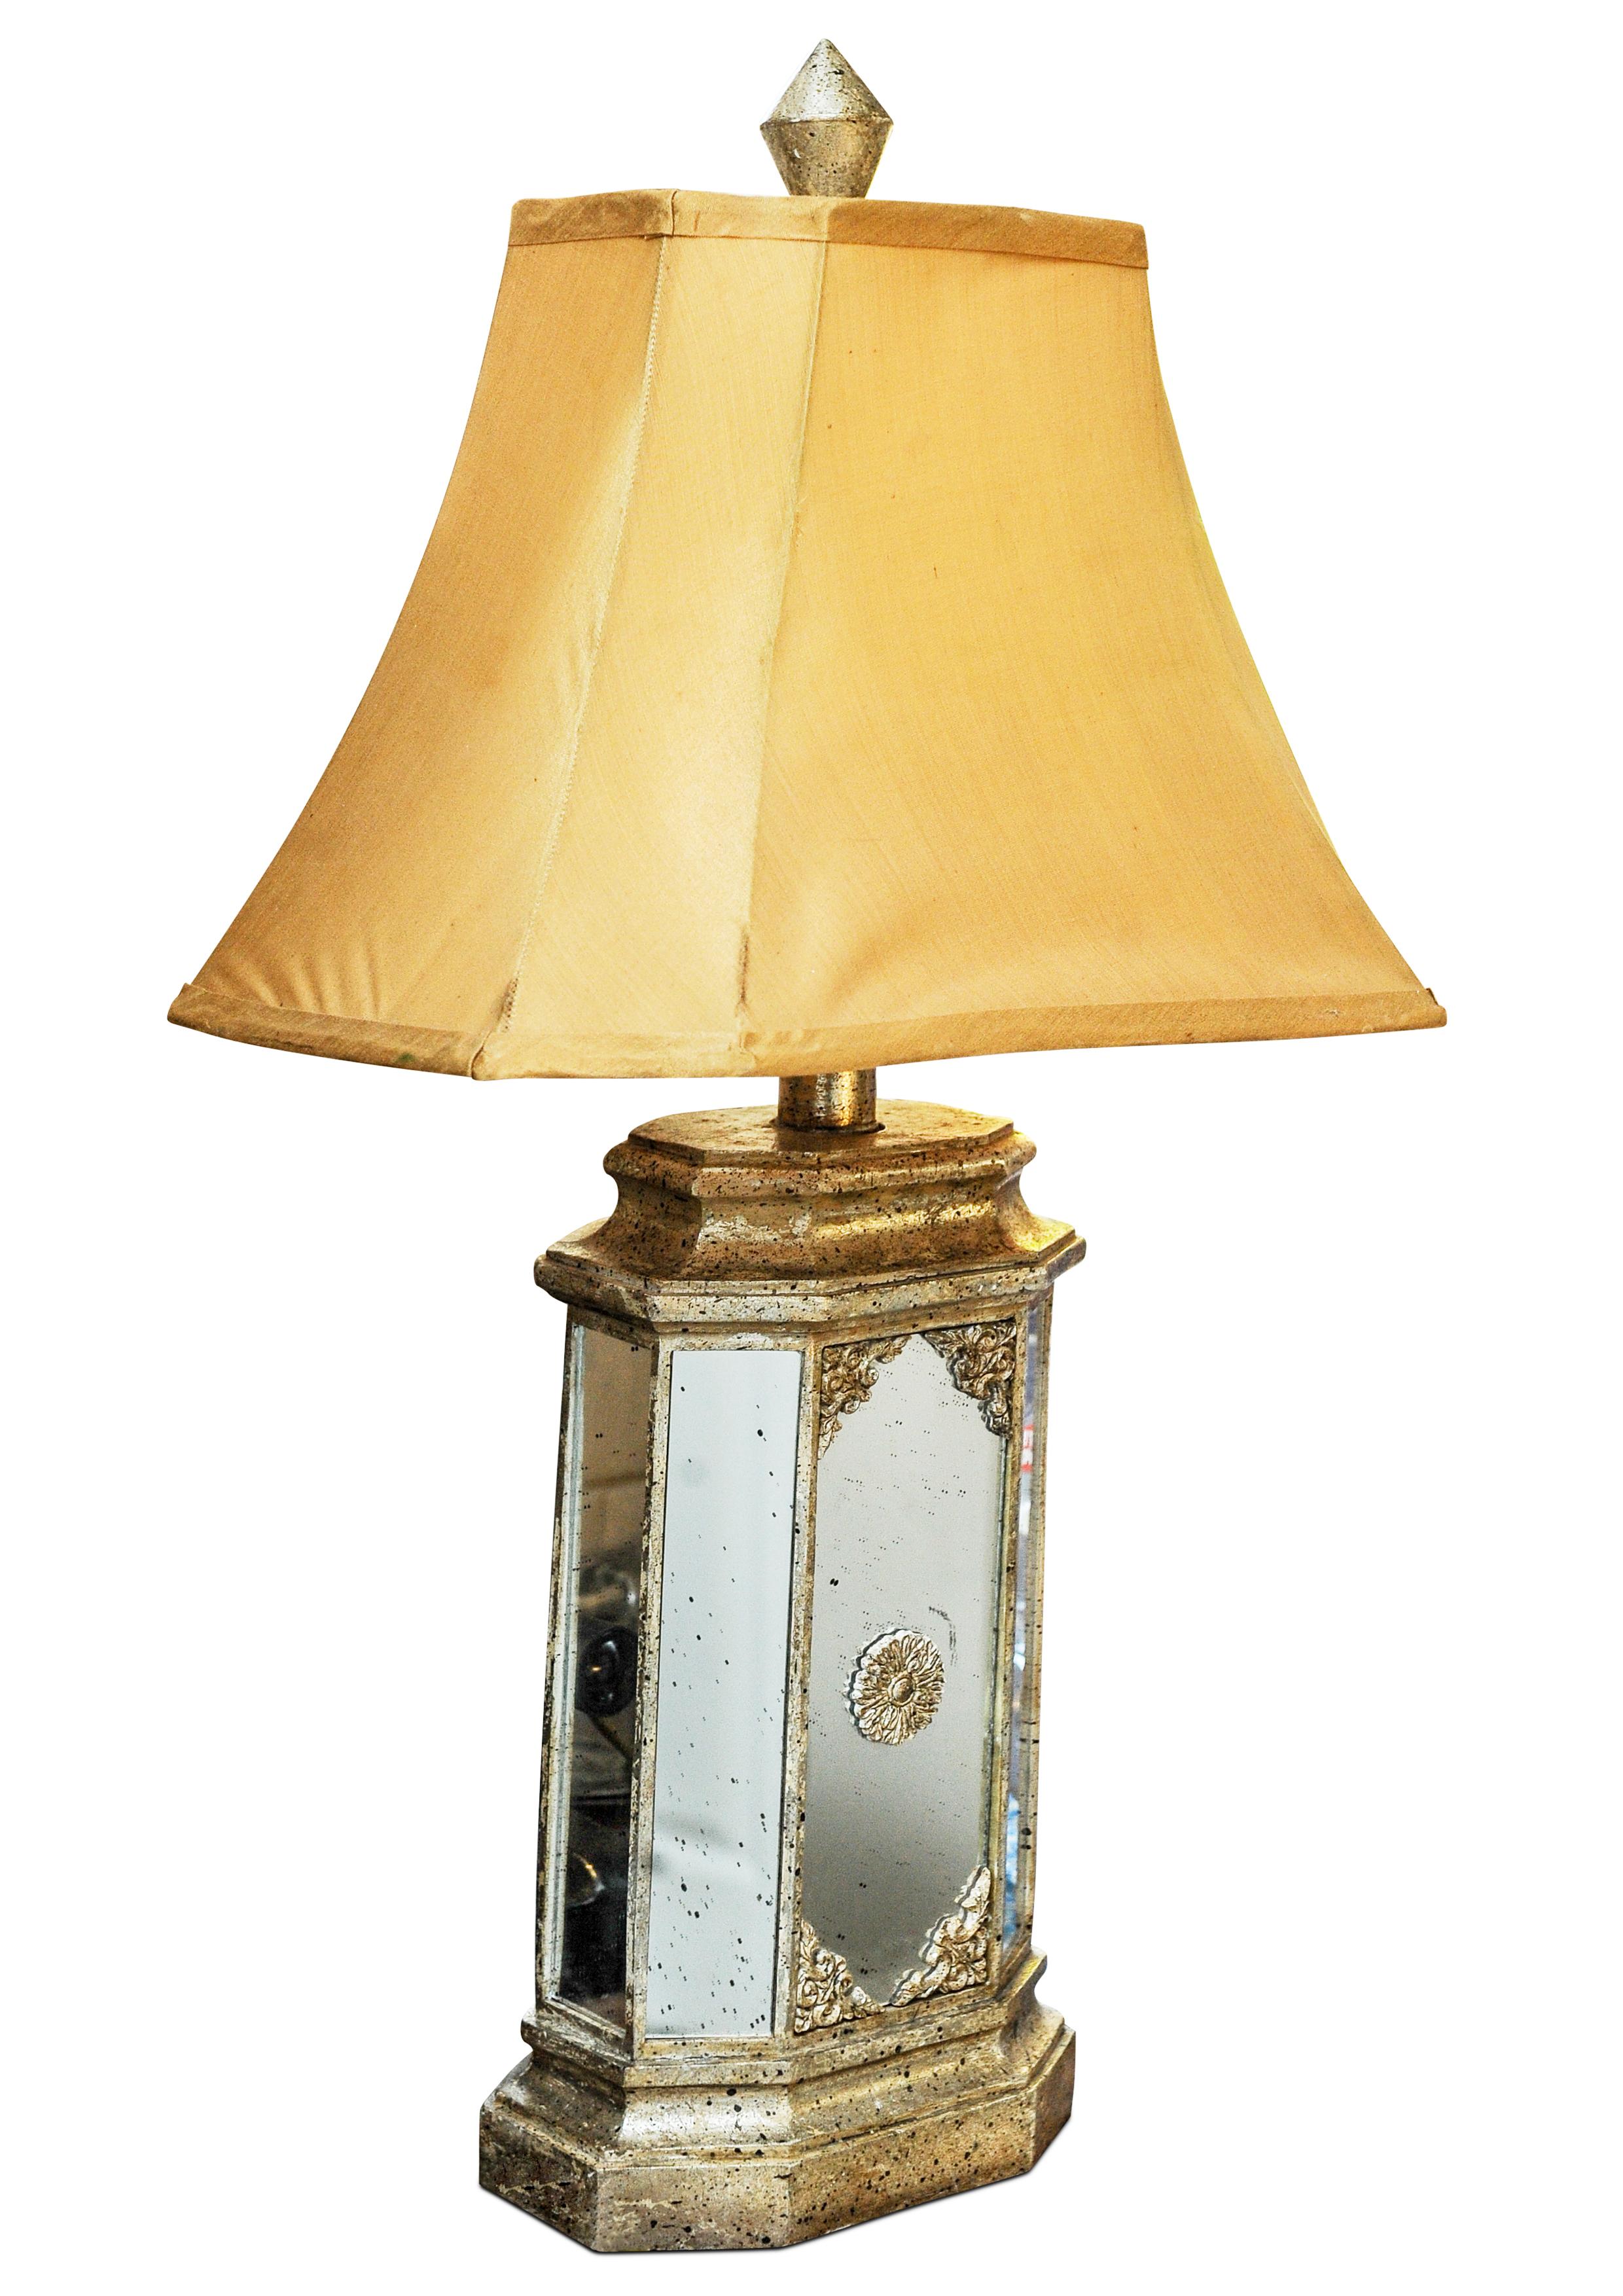 Hollywood Regency Design Opulent Mirrored Table Lamp With Shot Silk Shade Fitted With UK Three Pin Plug 


Height to the top of the lamp: 60cm
Width of the base of the lamp: 20.5cm 
Depth of the base of the lamp: 13cm 
